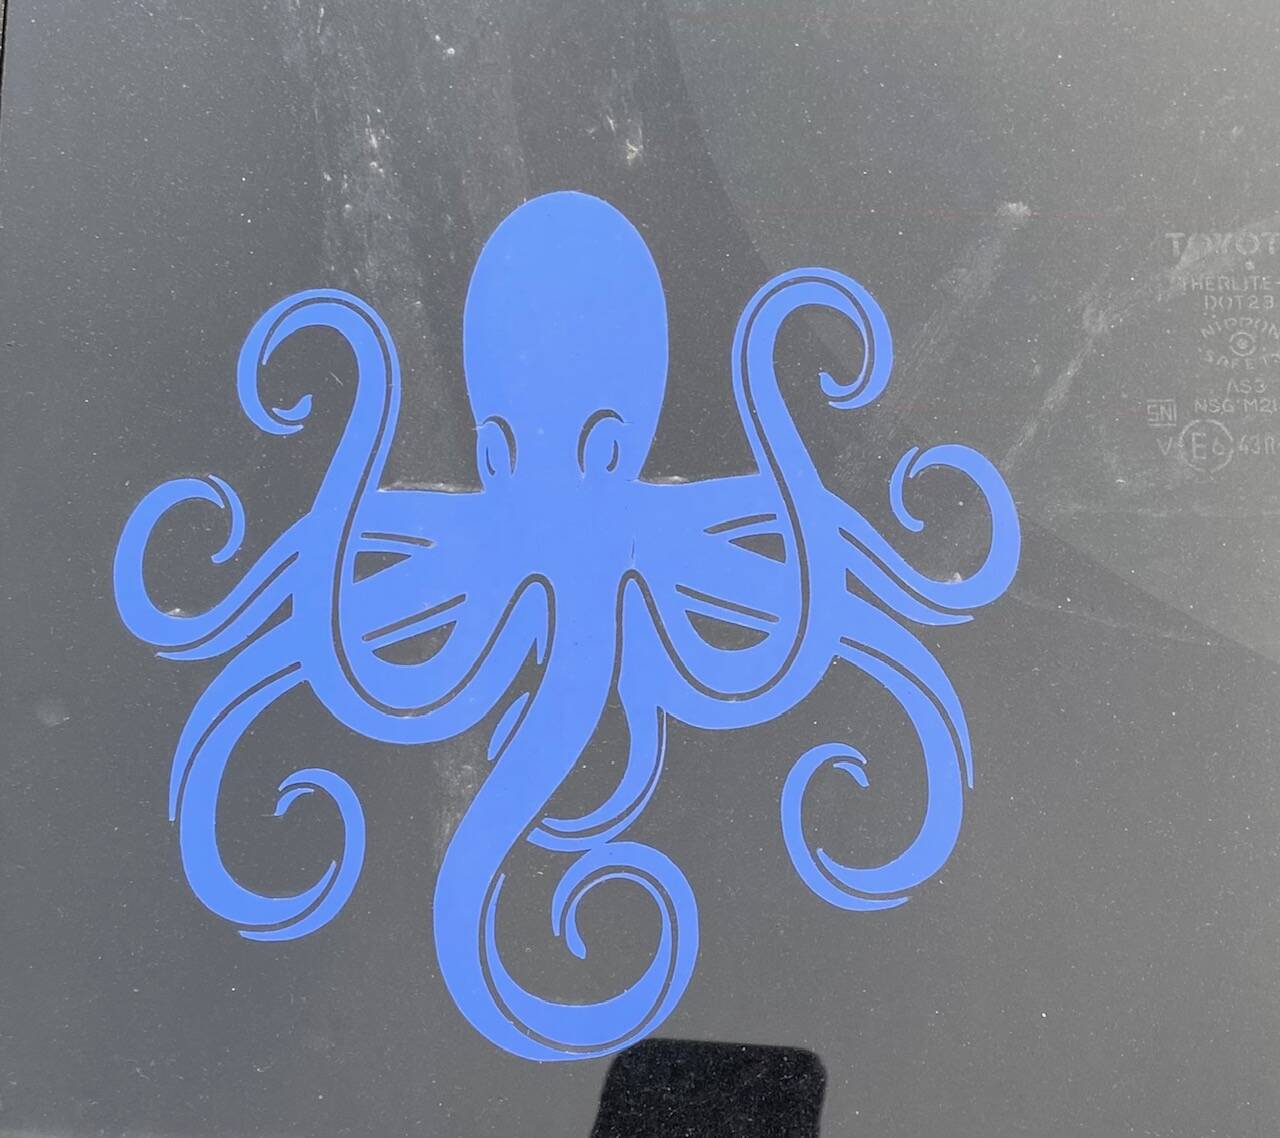 A blue octopus decorates a passing car on Oct. 22. (Photo by Denise Carroll)